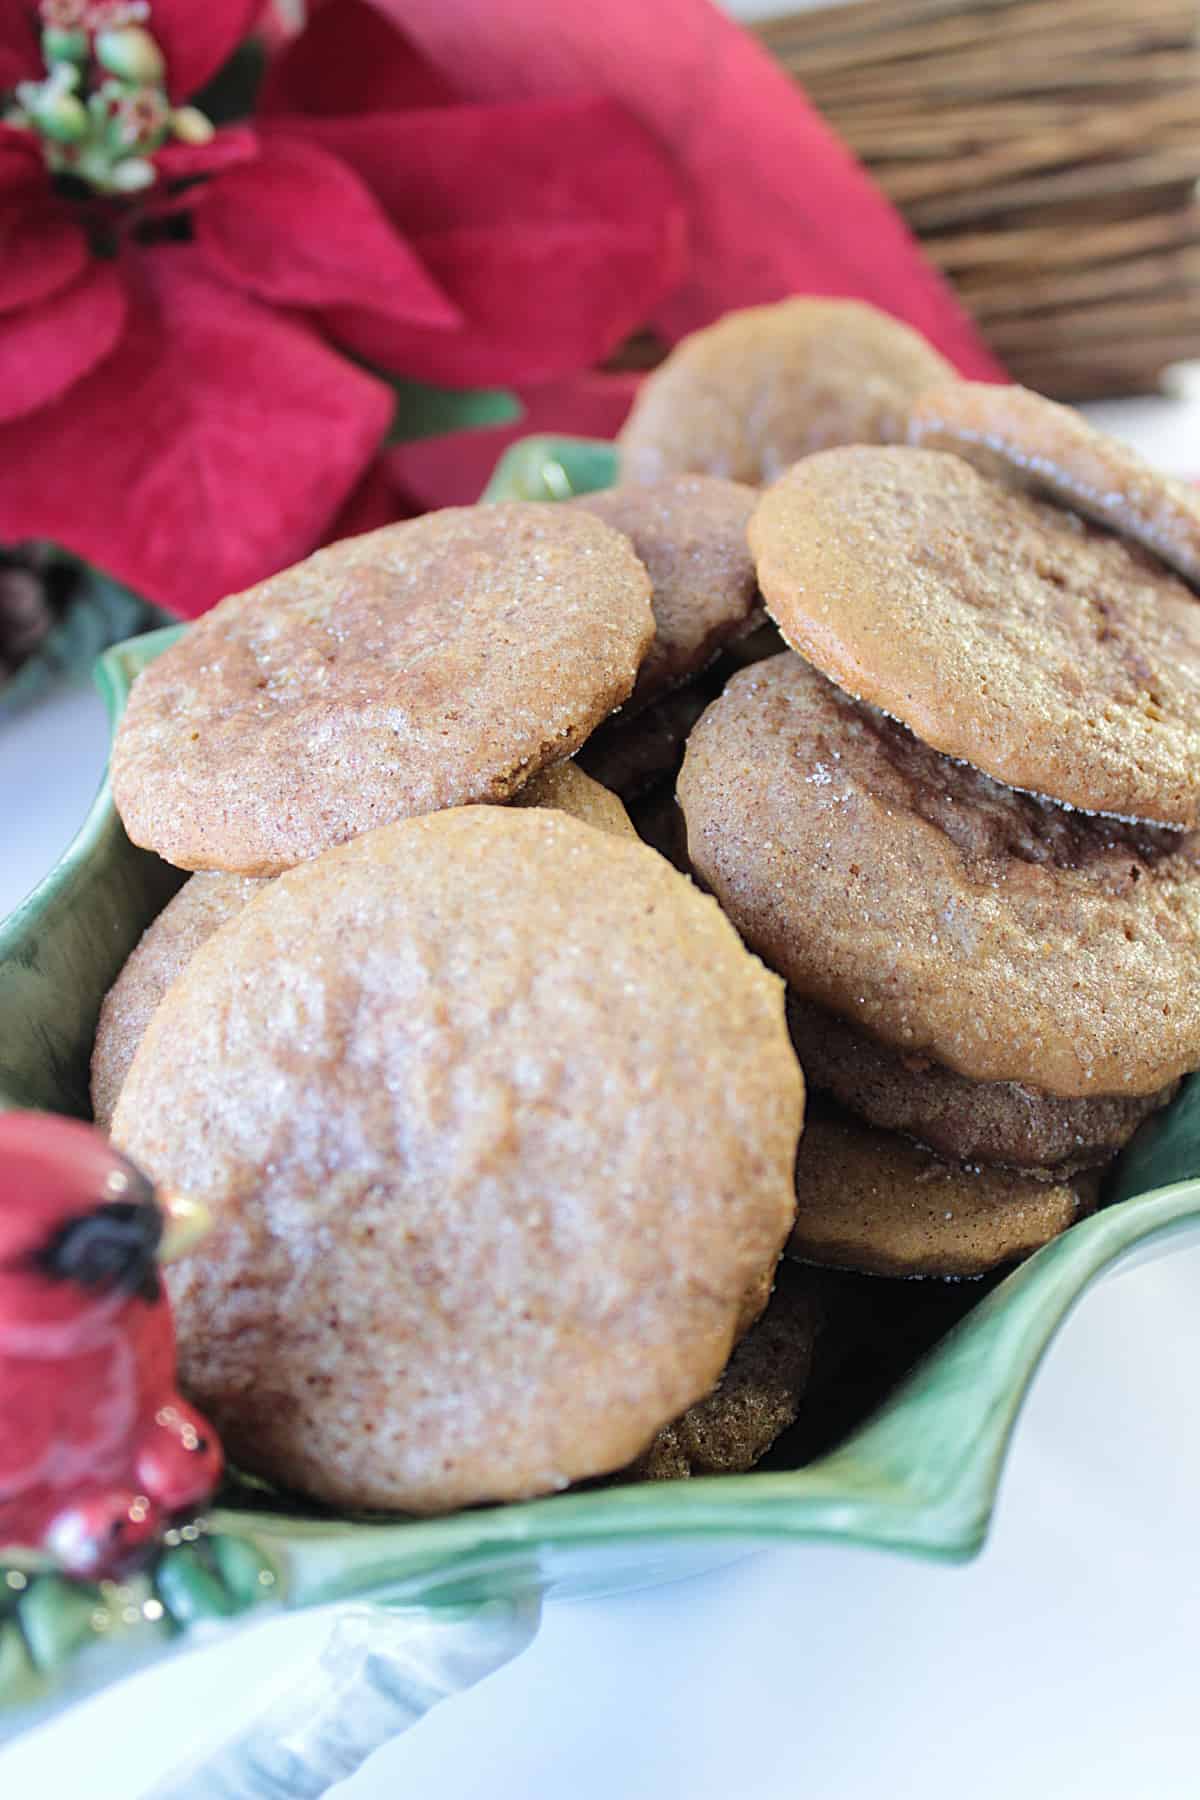 A holly berry Christmas dish filled with Soft Cinnamon Sugar Gingerbread Cookies along with poinsettias in the background.